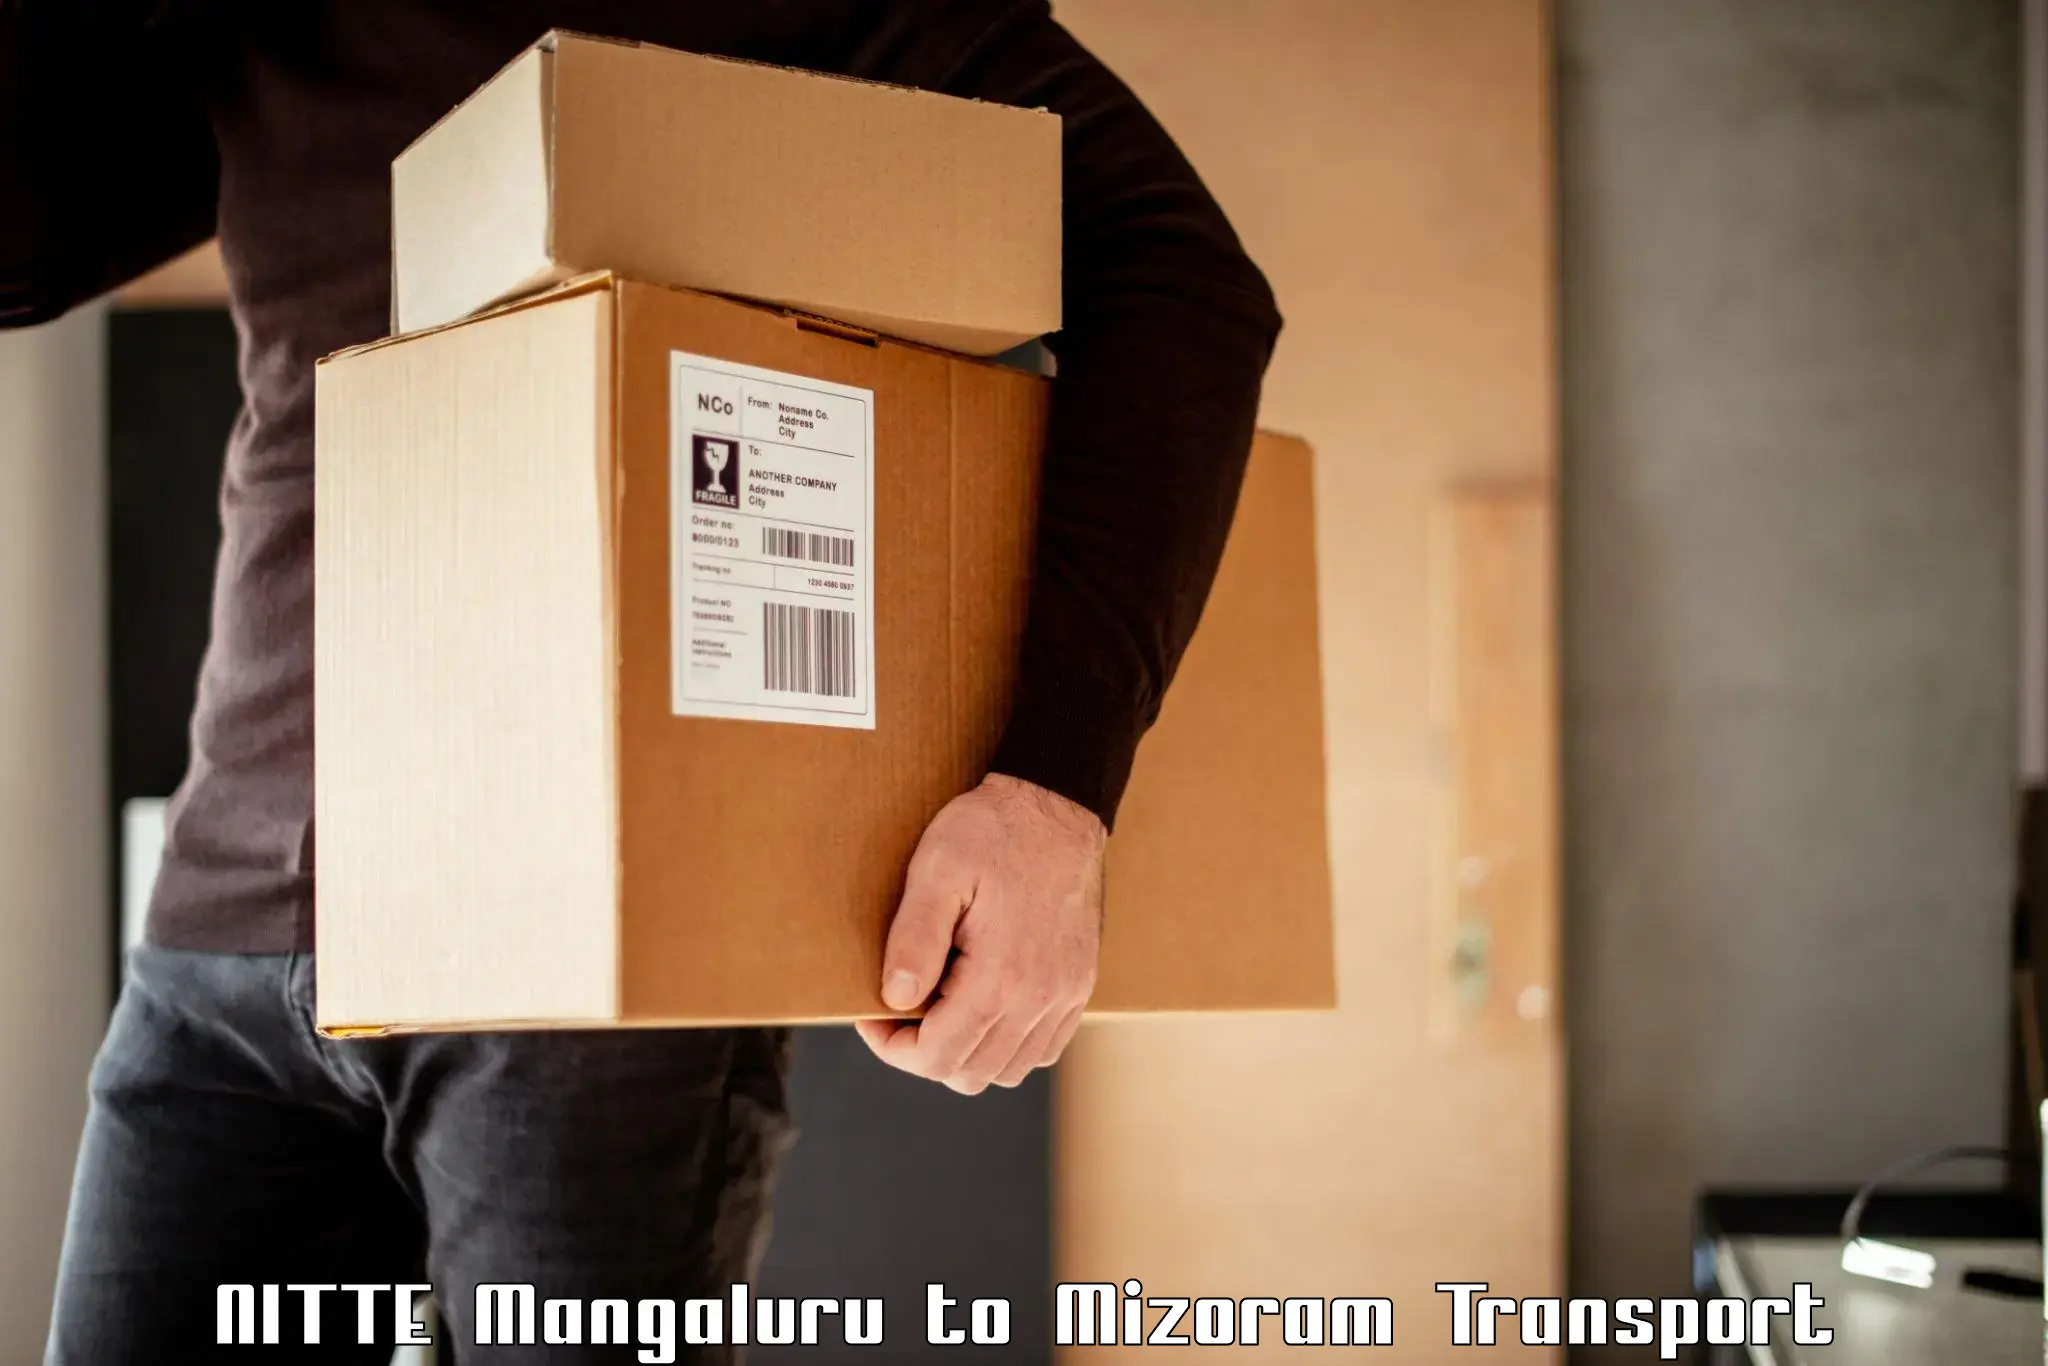 Container transportation services NITTE Mangaluru to Aizawl